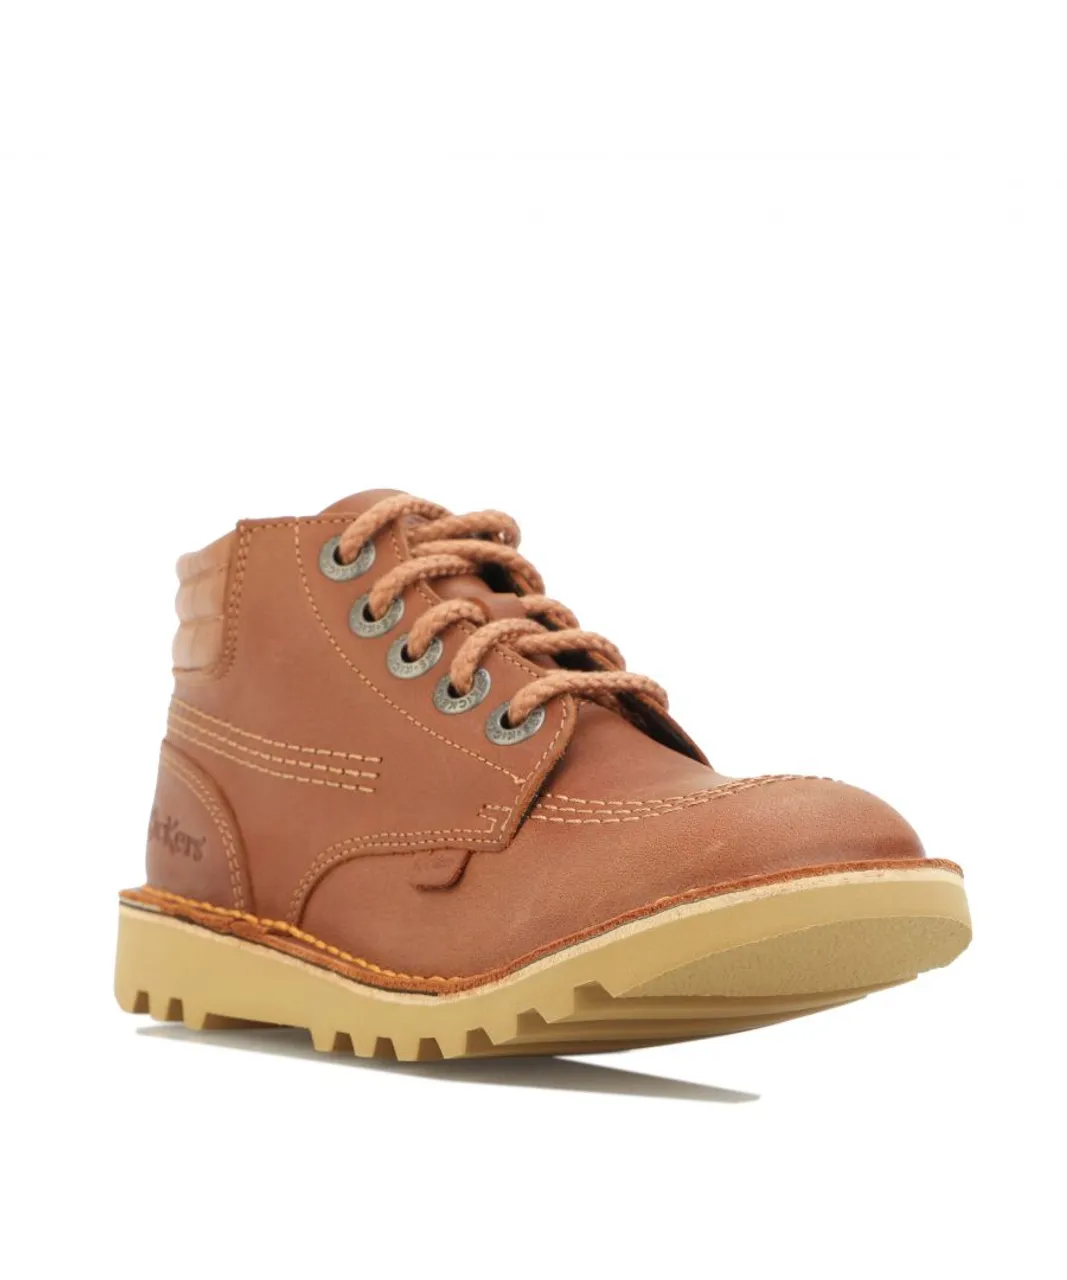 Kickers Boys Boy's Kick Hi Padded Leather Boots in Tan Leather (archived)